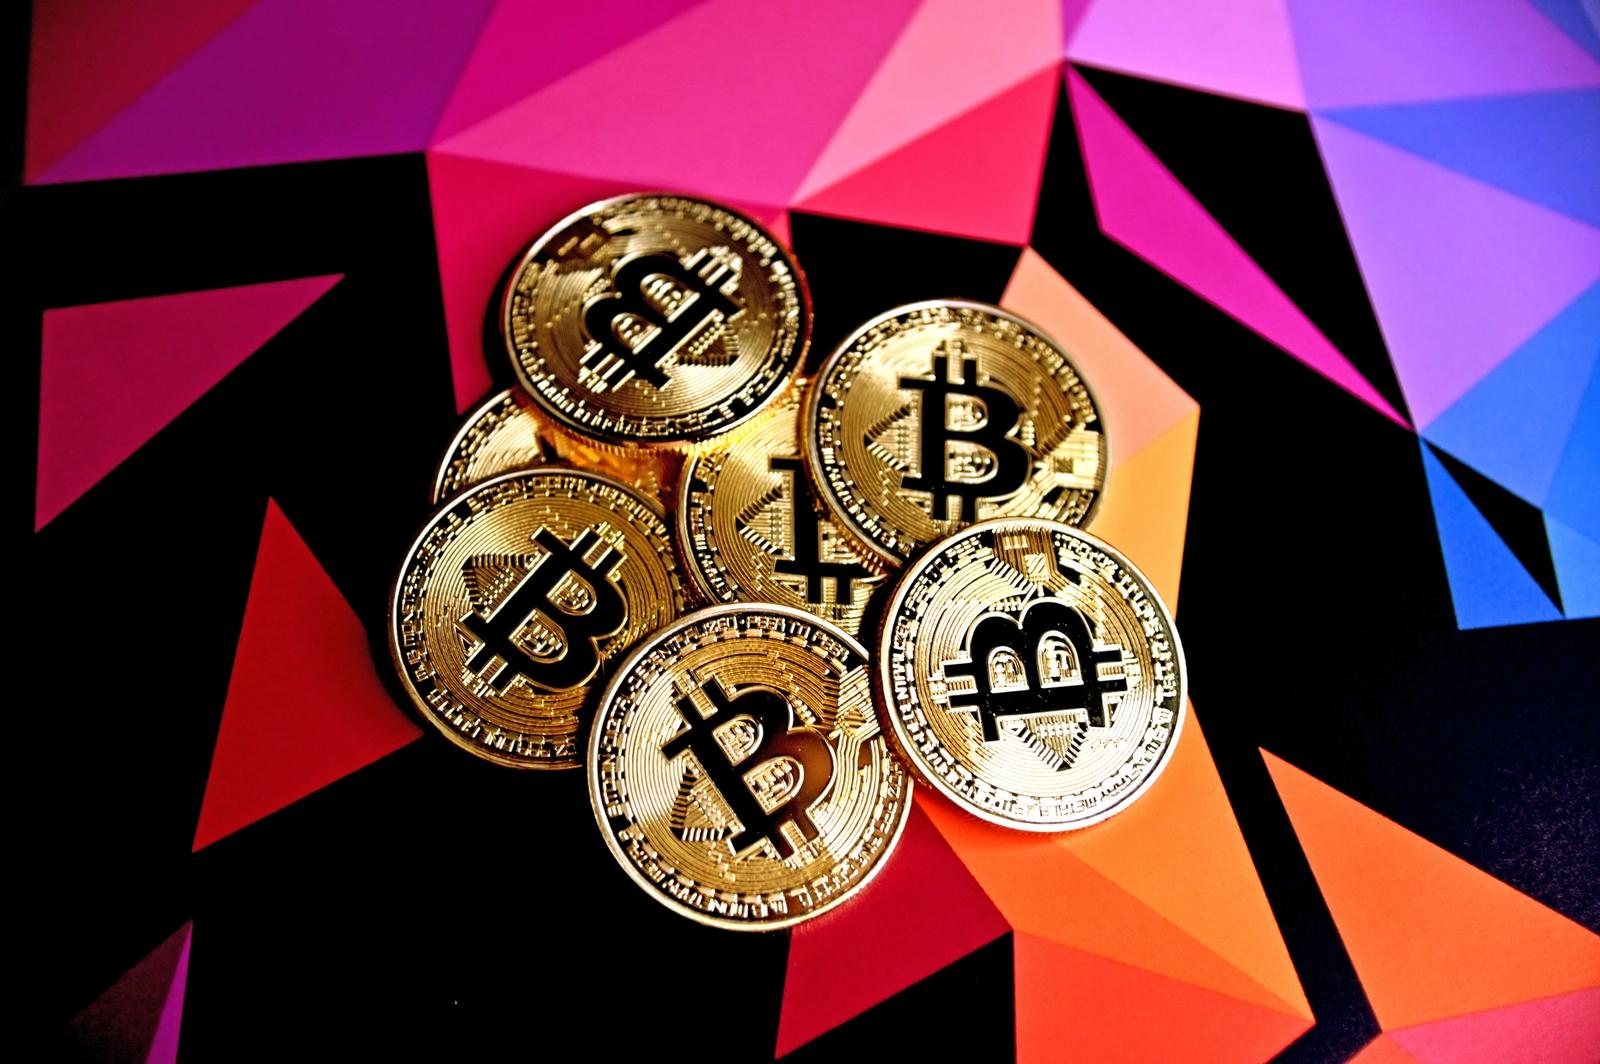 Bitcoin tokens on a colorful background